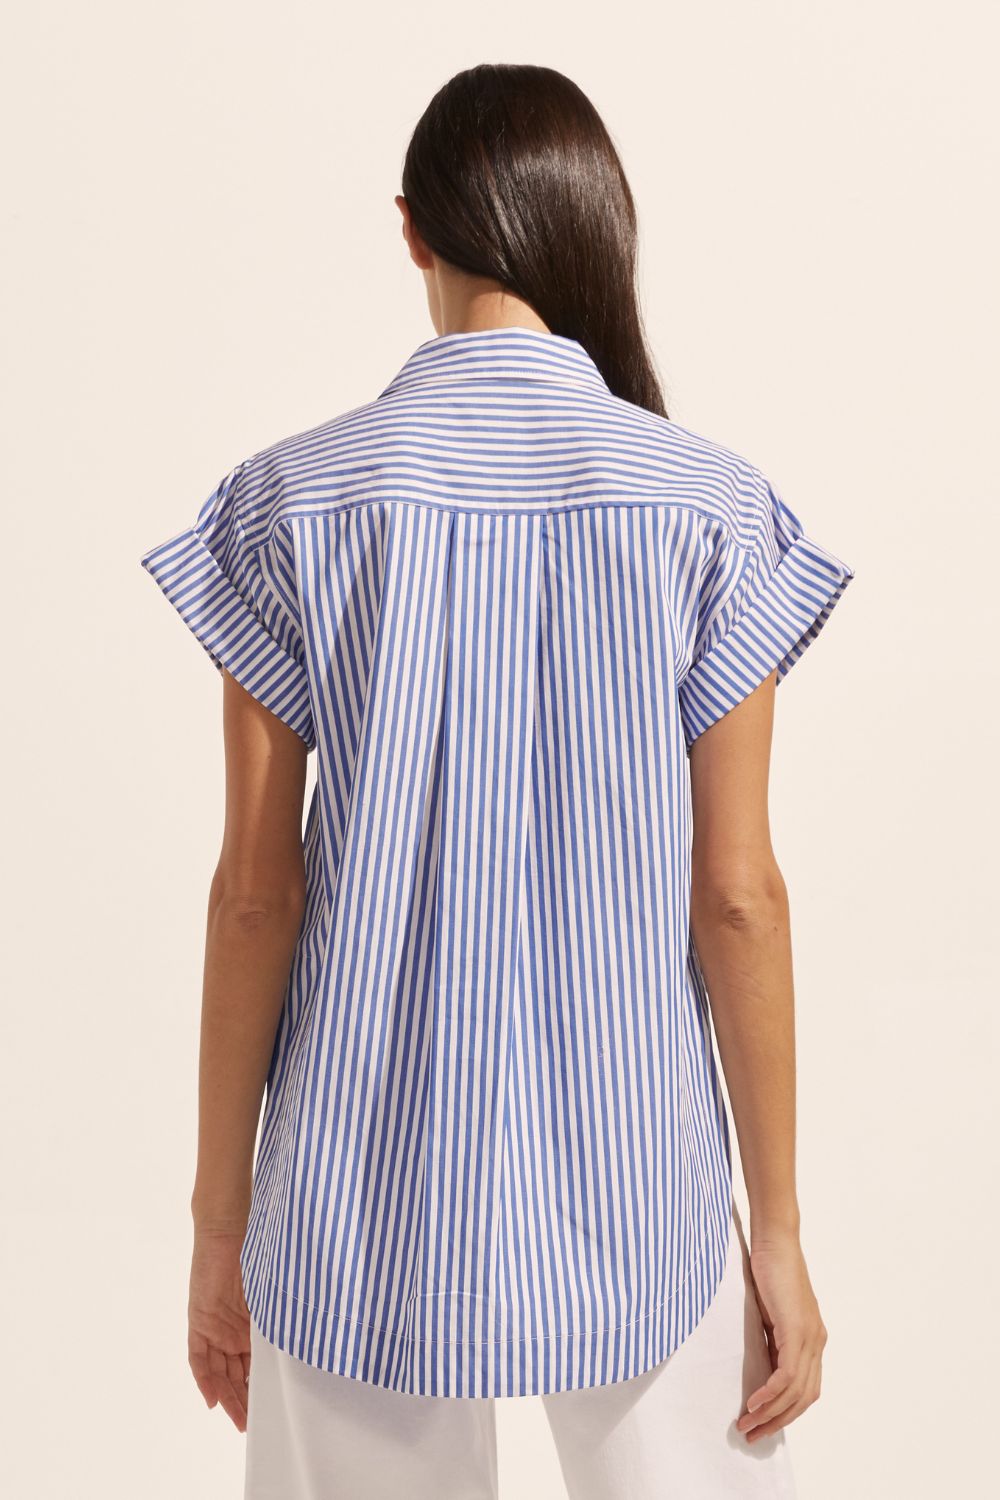 blue and white stripe, cuffed short sleeve, high-low hemline, covered placket, oversized patch pockets, shirt, top, back image